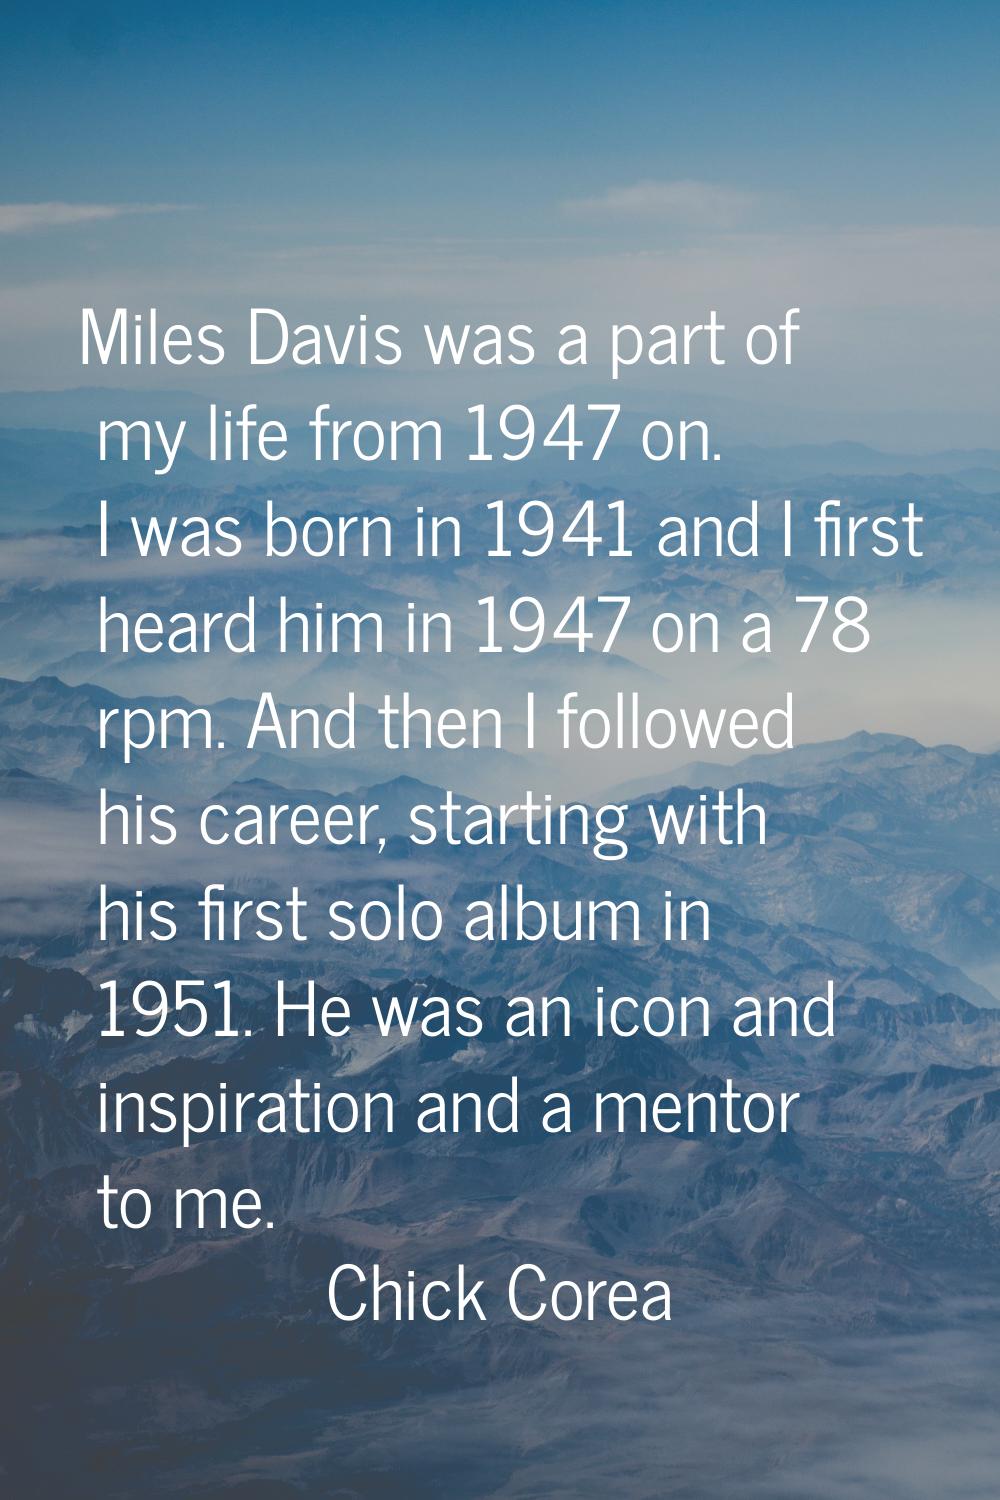 Miles Davis was a part of my life from 1947 on. I was born in 1941 and I first heard him in 1947 on